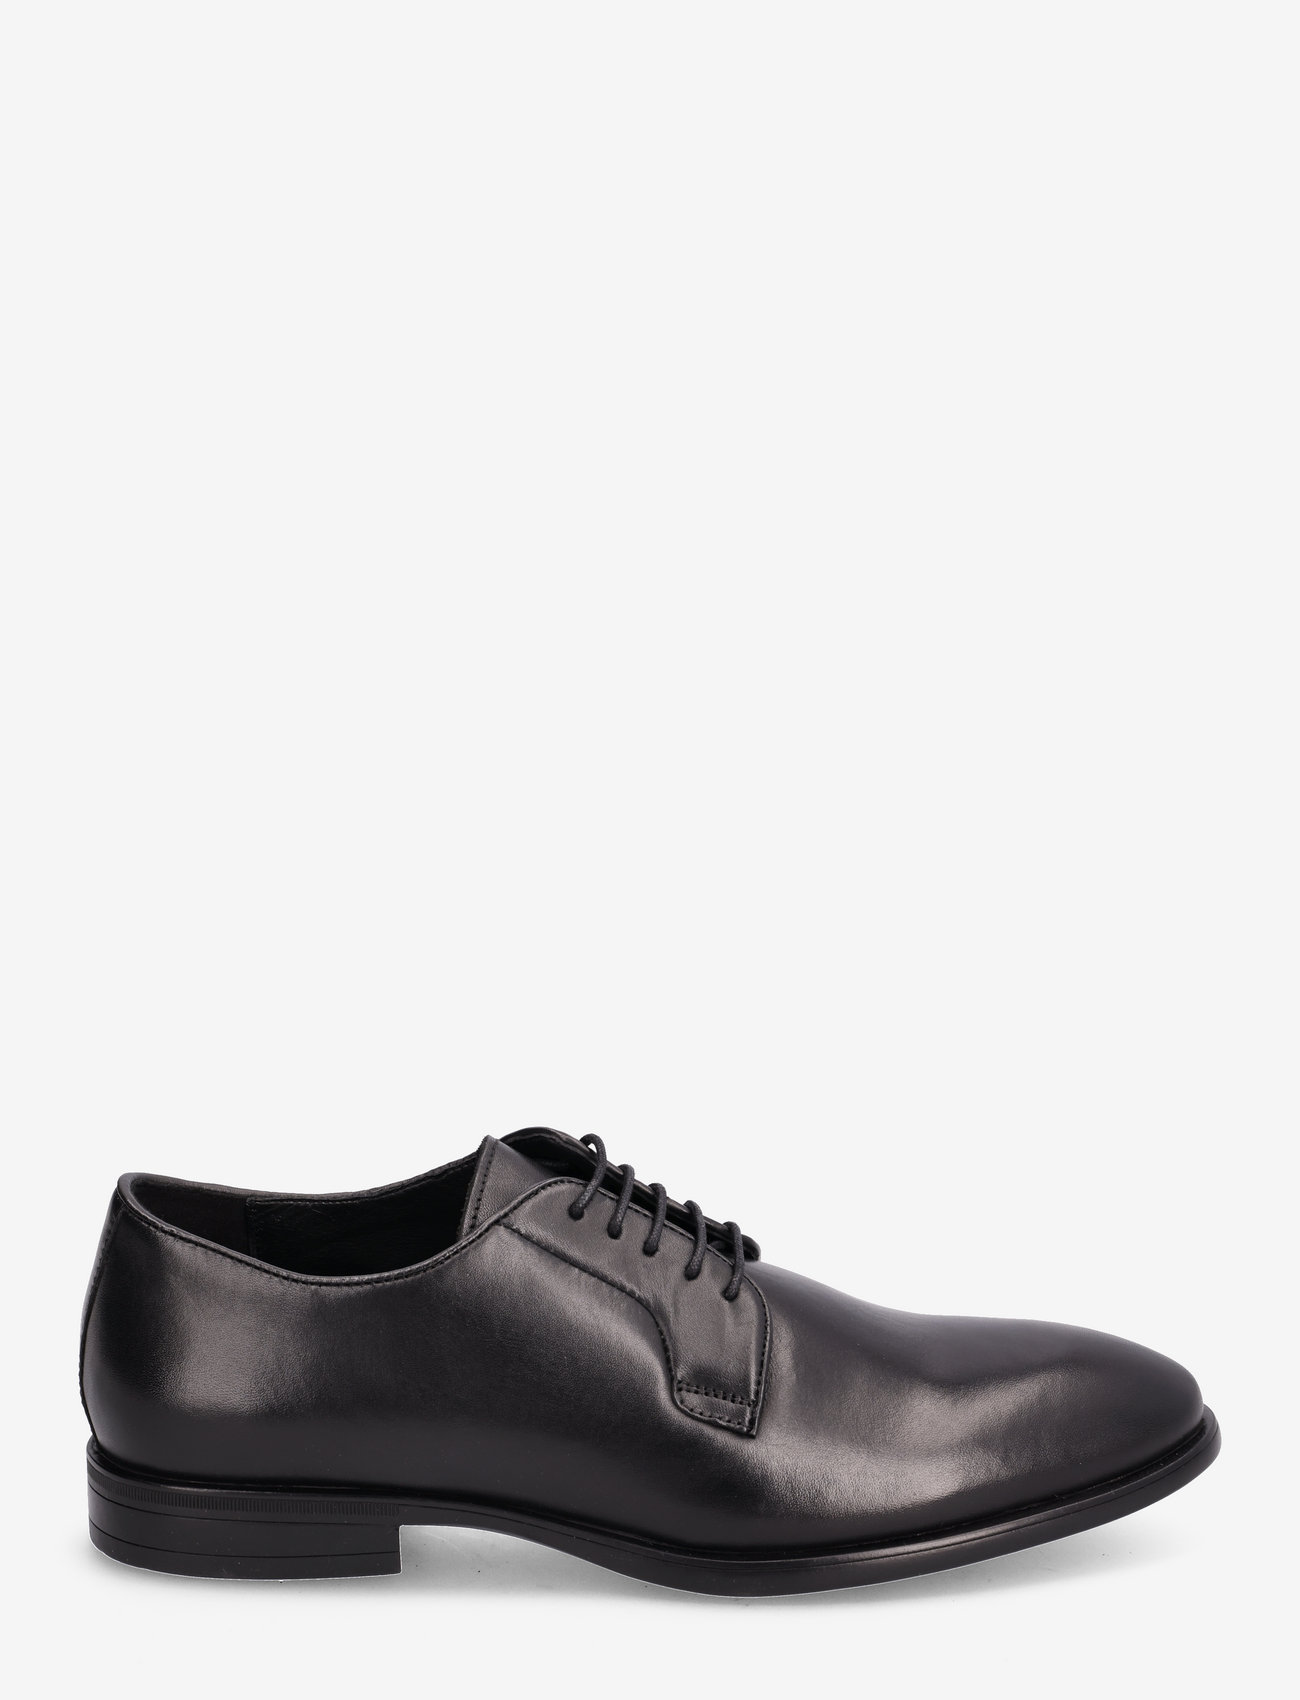 Marstrand - MURPHY DERBY MARSTRAND - laced shoes - black - 1